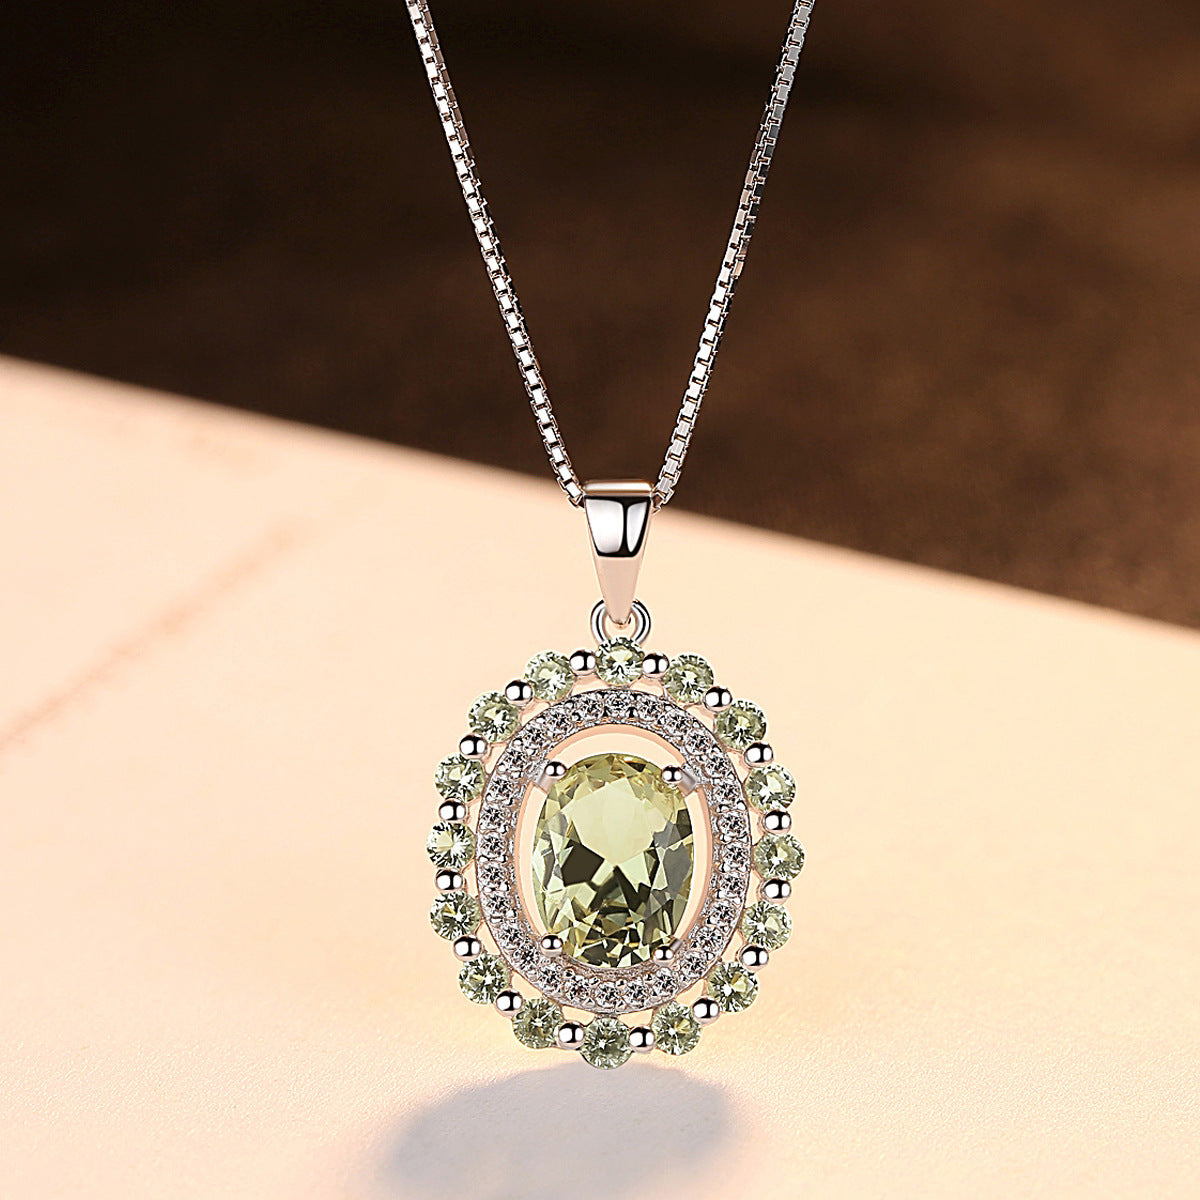 Gemstonely- S925 Silver Necklace with Olive Green Gemstone Pendant on Box Chain